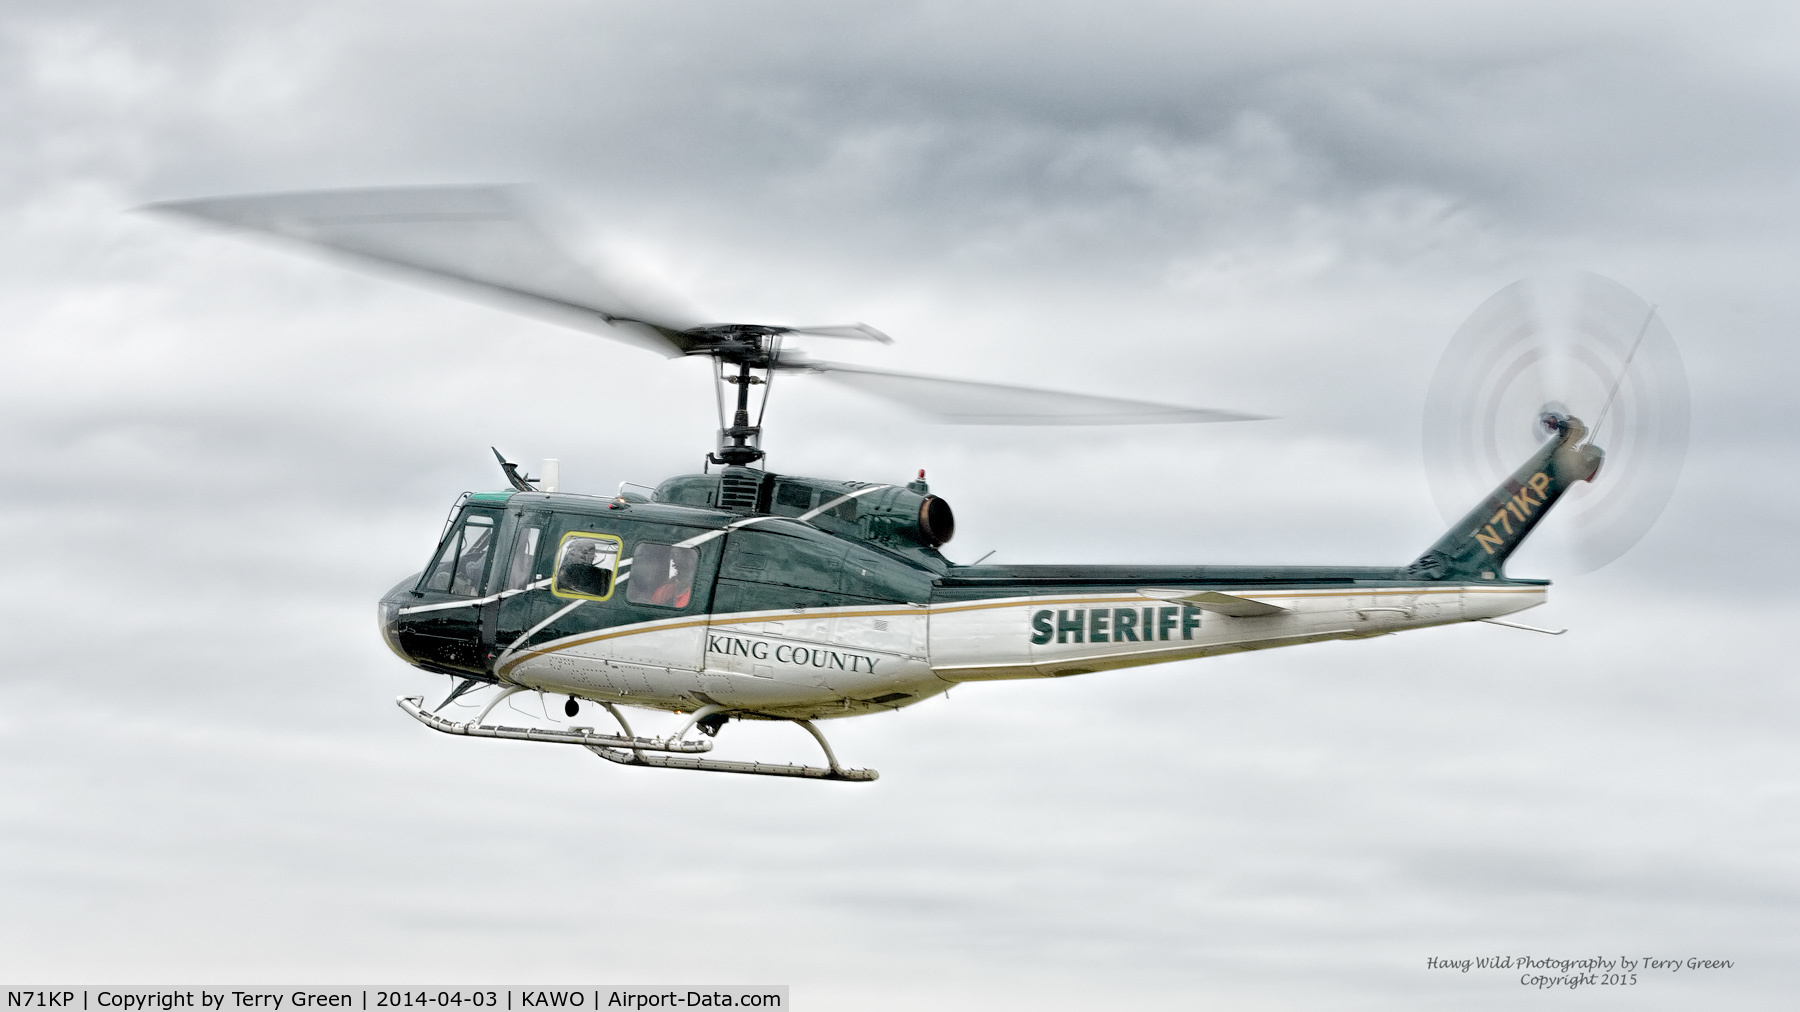 N71KP, 1970 Bell UH-1H Iroquois C/N 12619, King County Sheriff Guardian 2